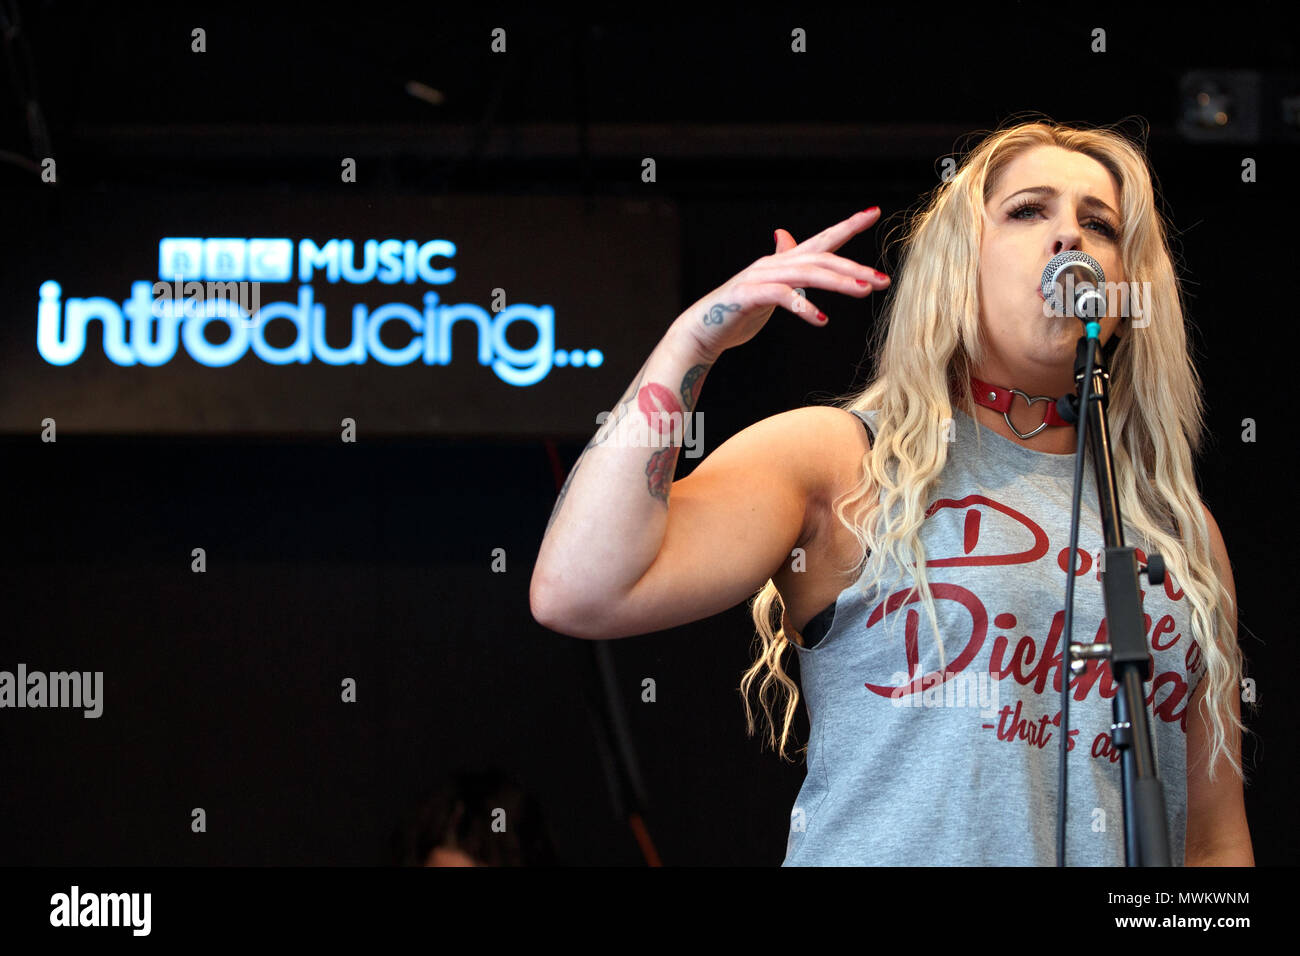 A young musician (Tiggy Dockerty of Eva Plays Dead) performing on a BBC Introducing stage. BBC Music Introducing logo, Tiggy Dockerty singer, Tiggy Dee, Eva Plays Dead band. Stock Photo